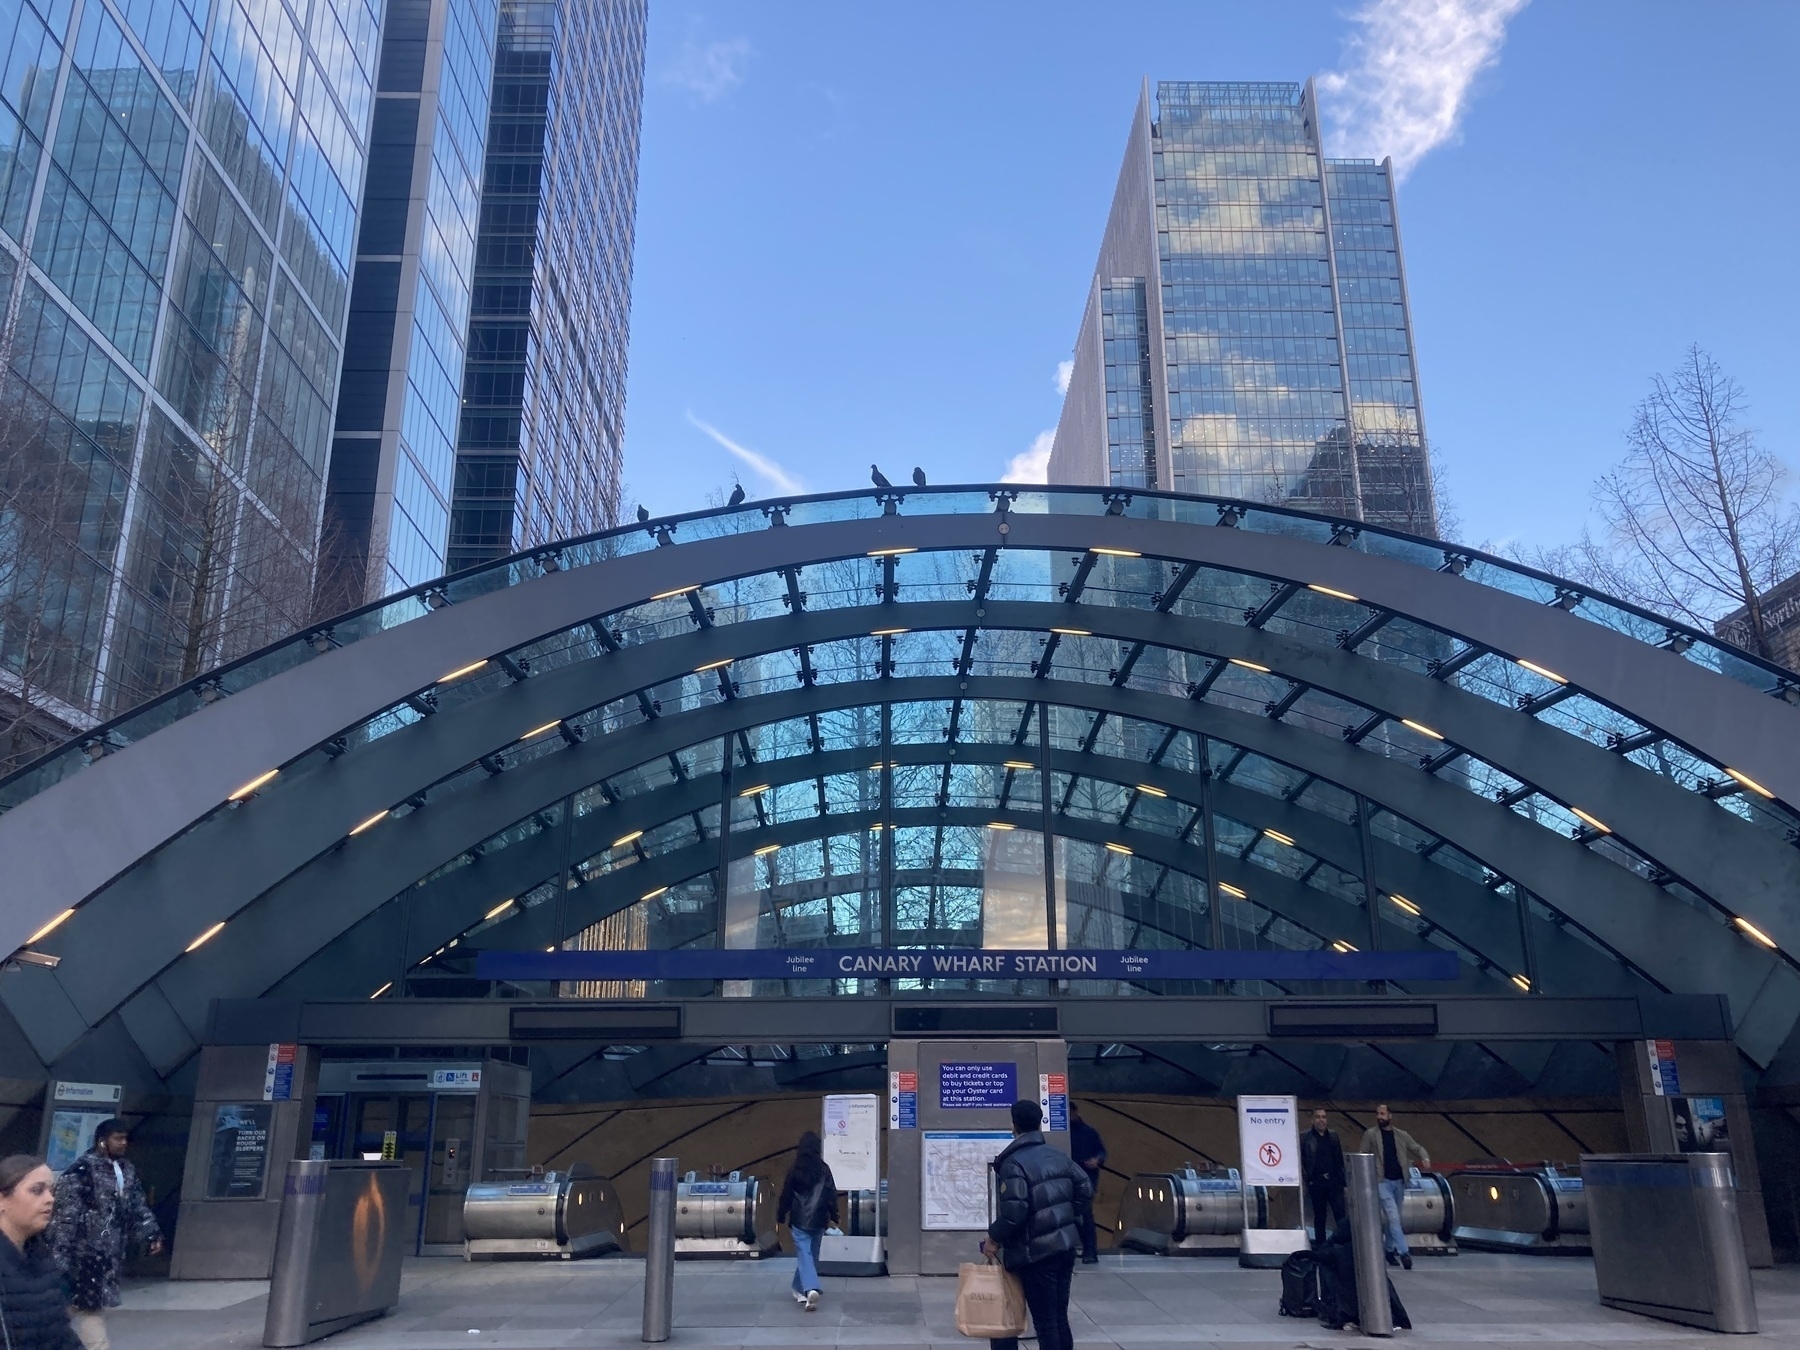 A view of the entrance to Canary Wharf underground station - with pigeons